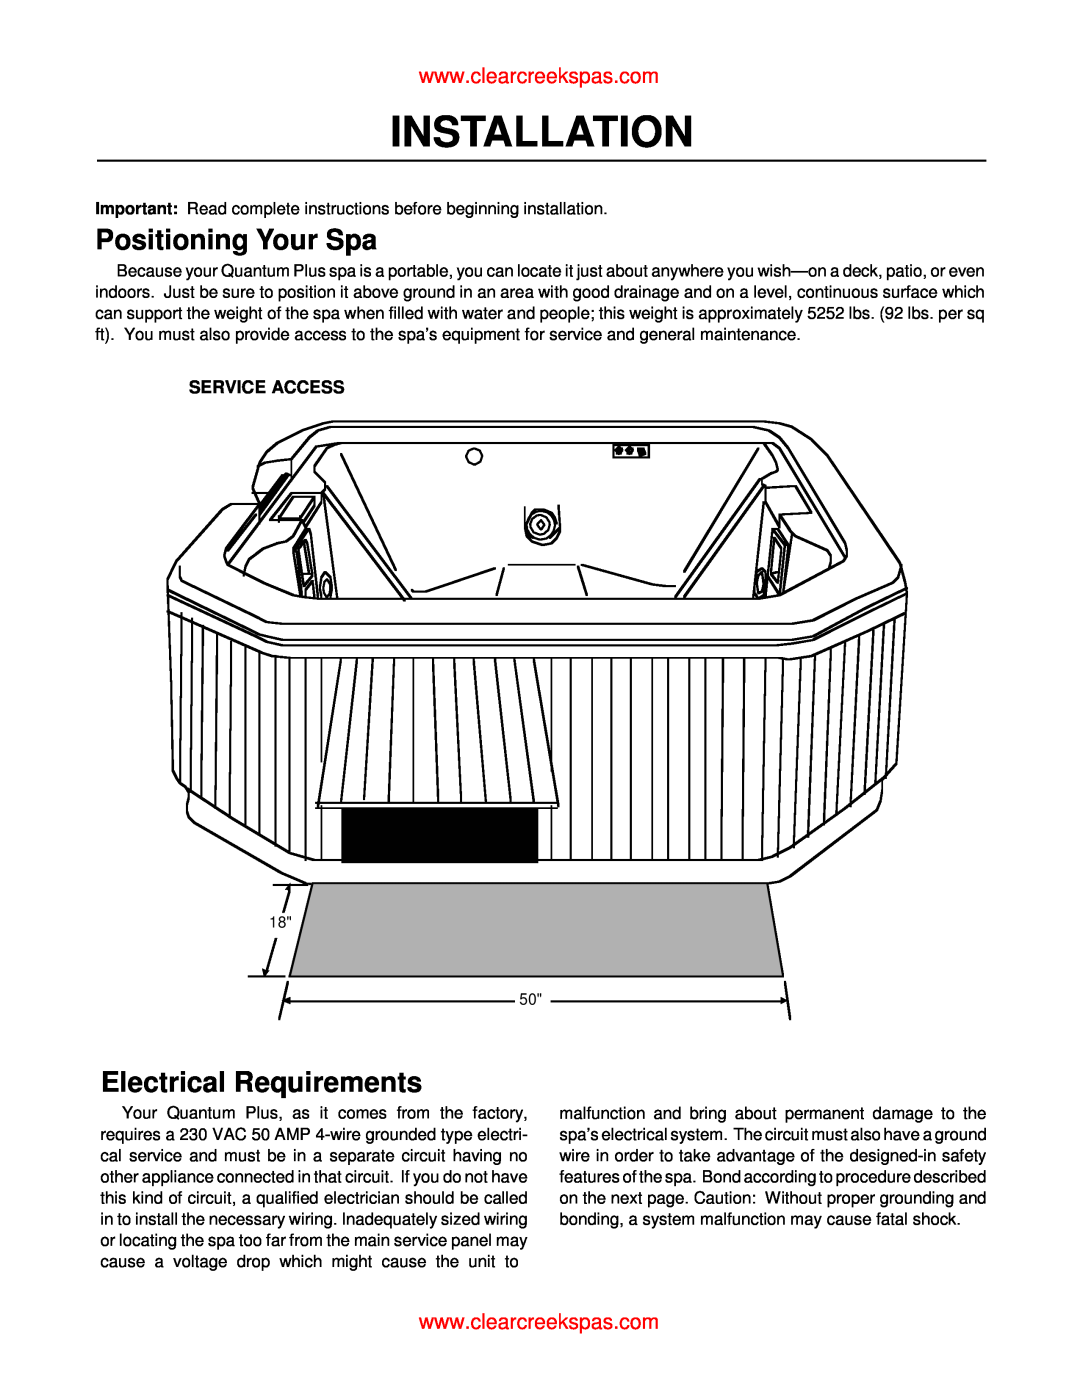 Whirlpool oortable spa owner manual Positioning Your Spa, Electrical Requirements, Service Access, Installation 